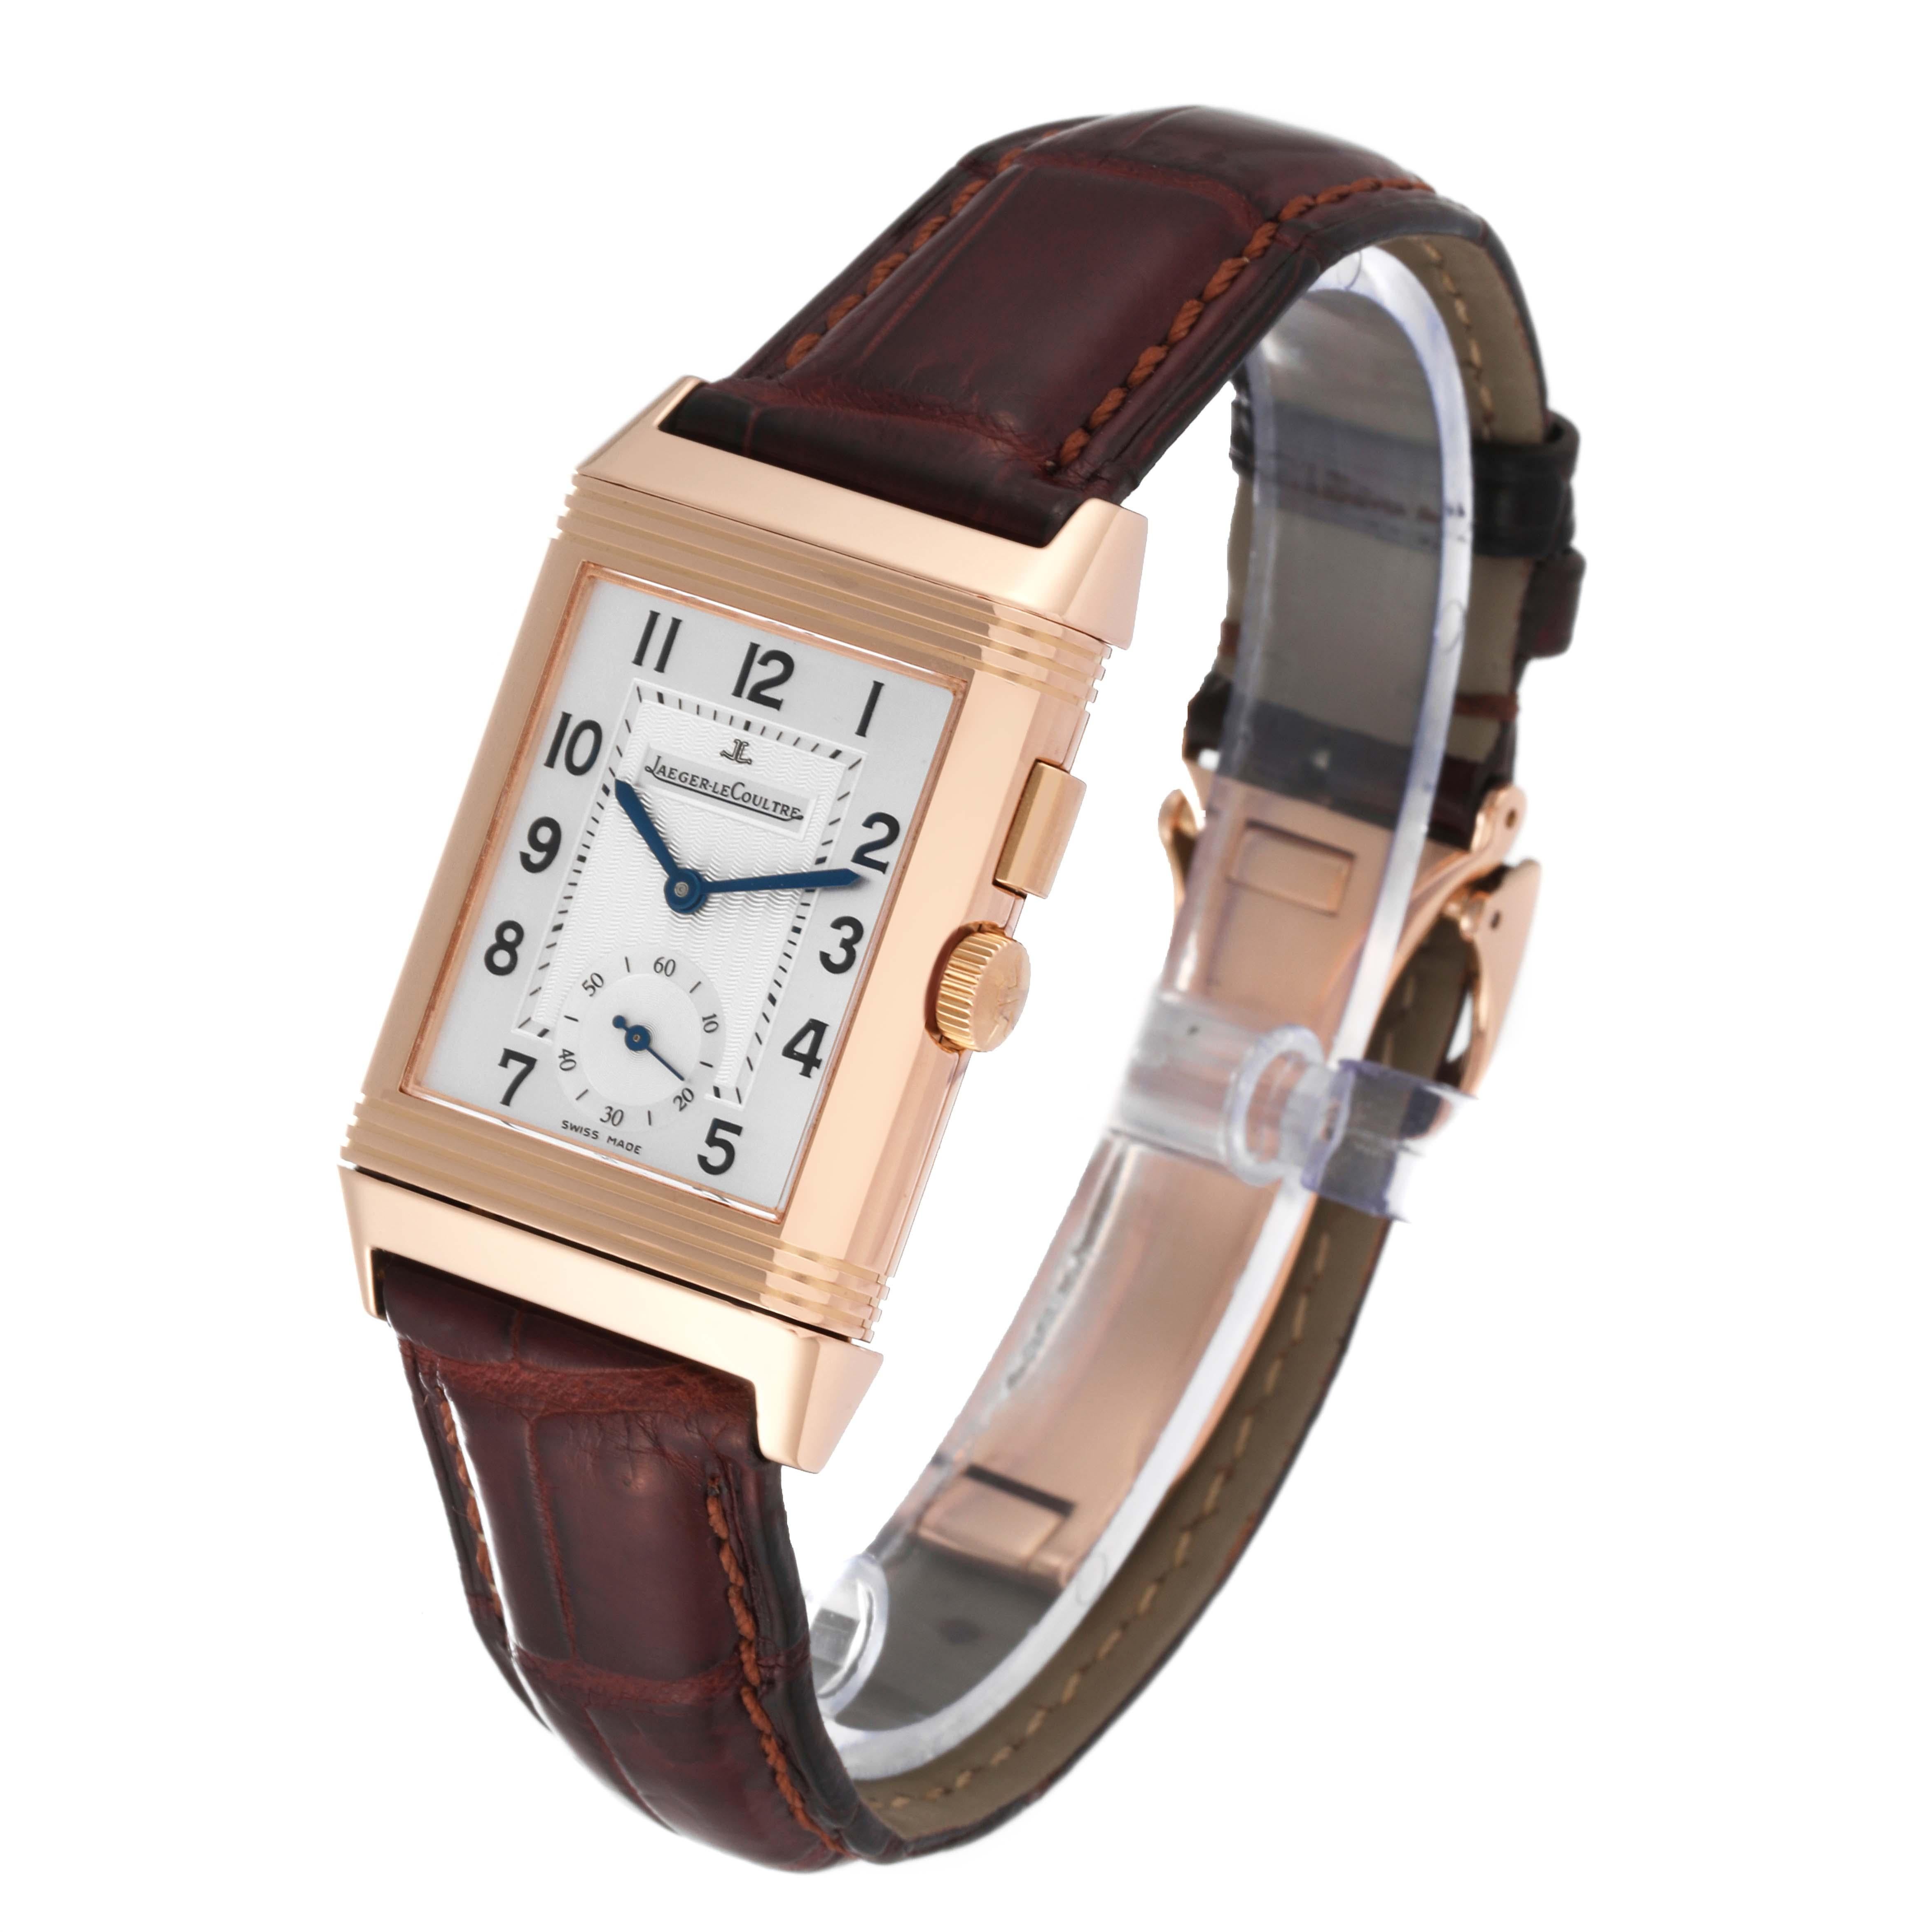 Jaeger LeCoultre Reverso Duoface Rose Gold Mens Watch 272.2.54 Q2712410 2